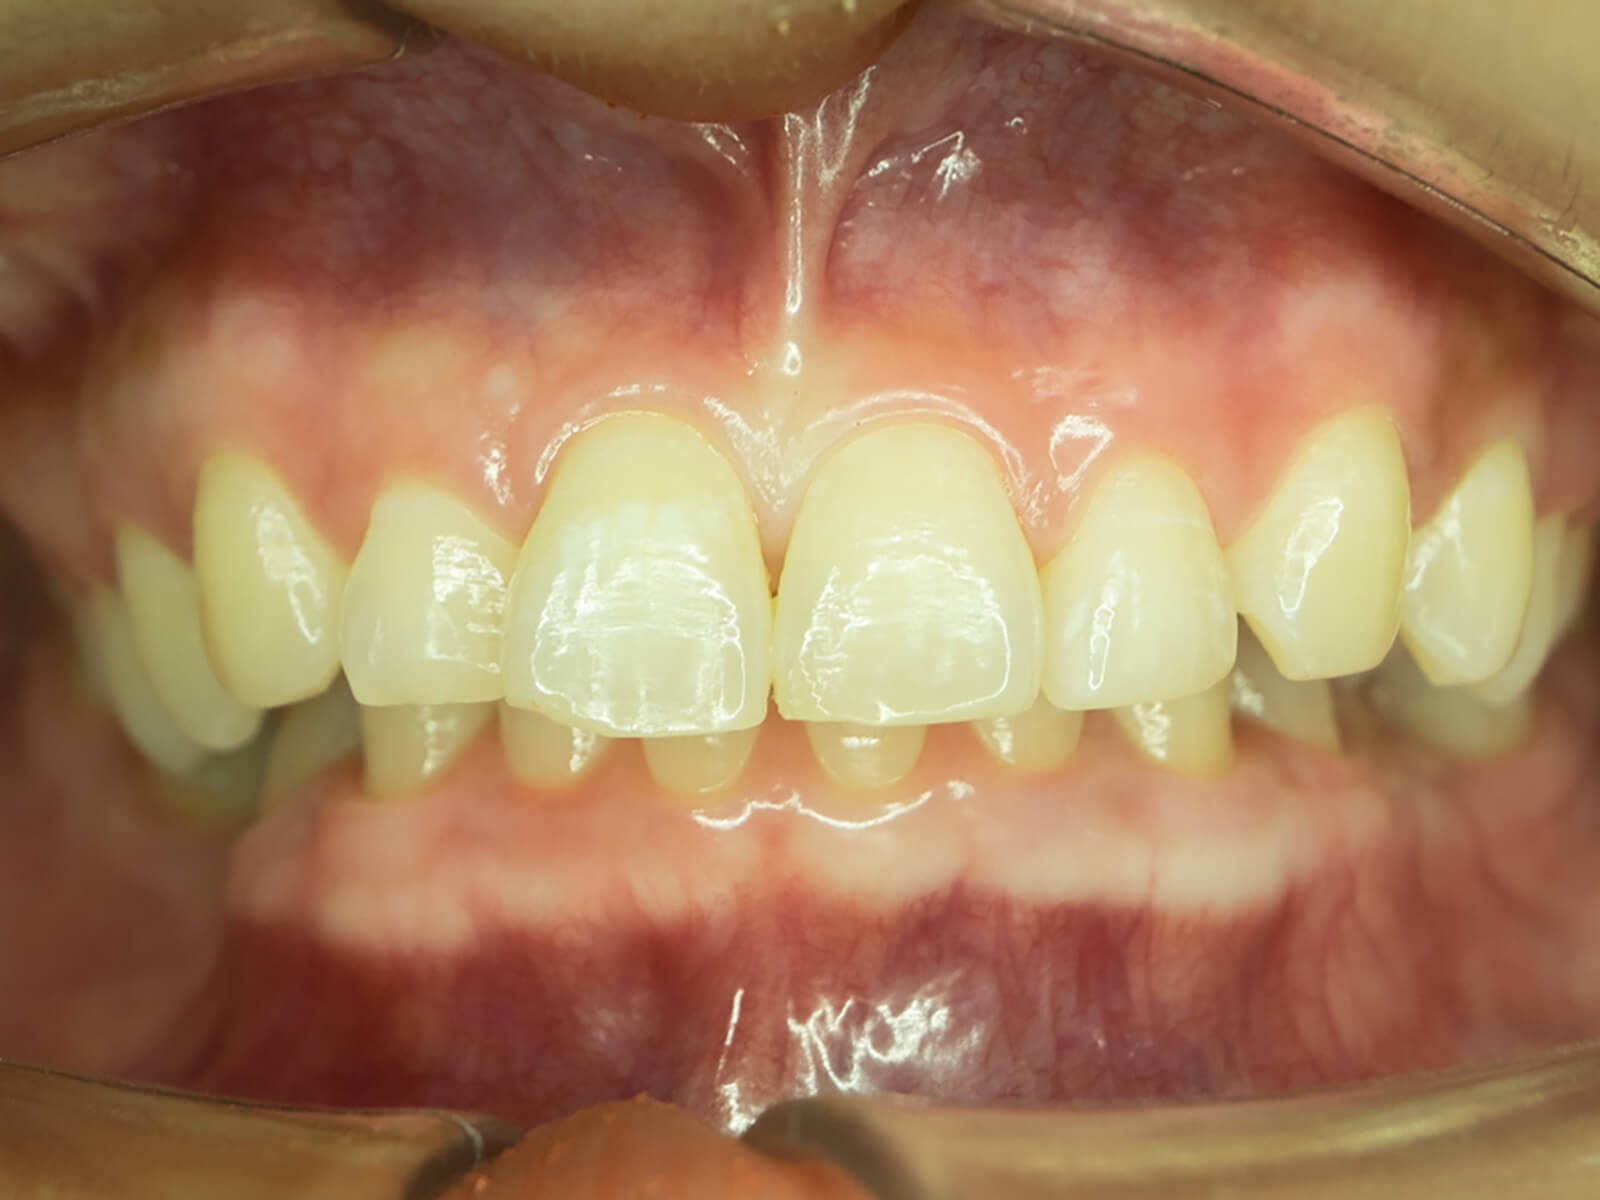 How Do You Get Rid of Gingival Pigmentation?